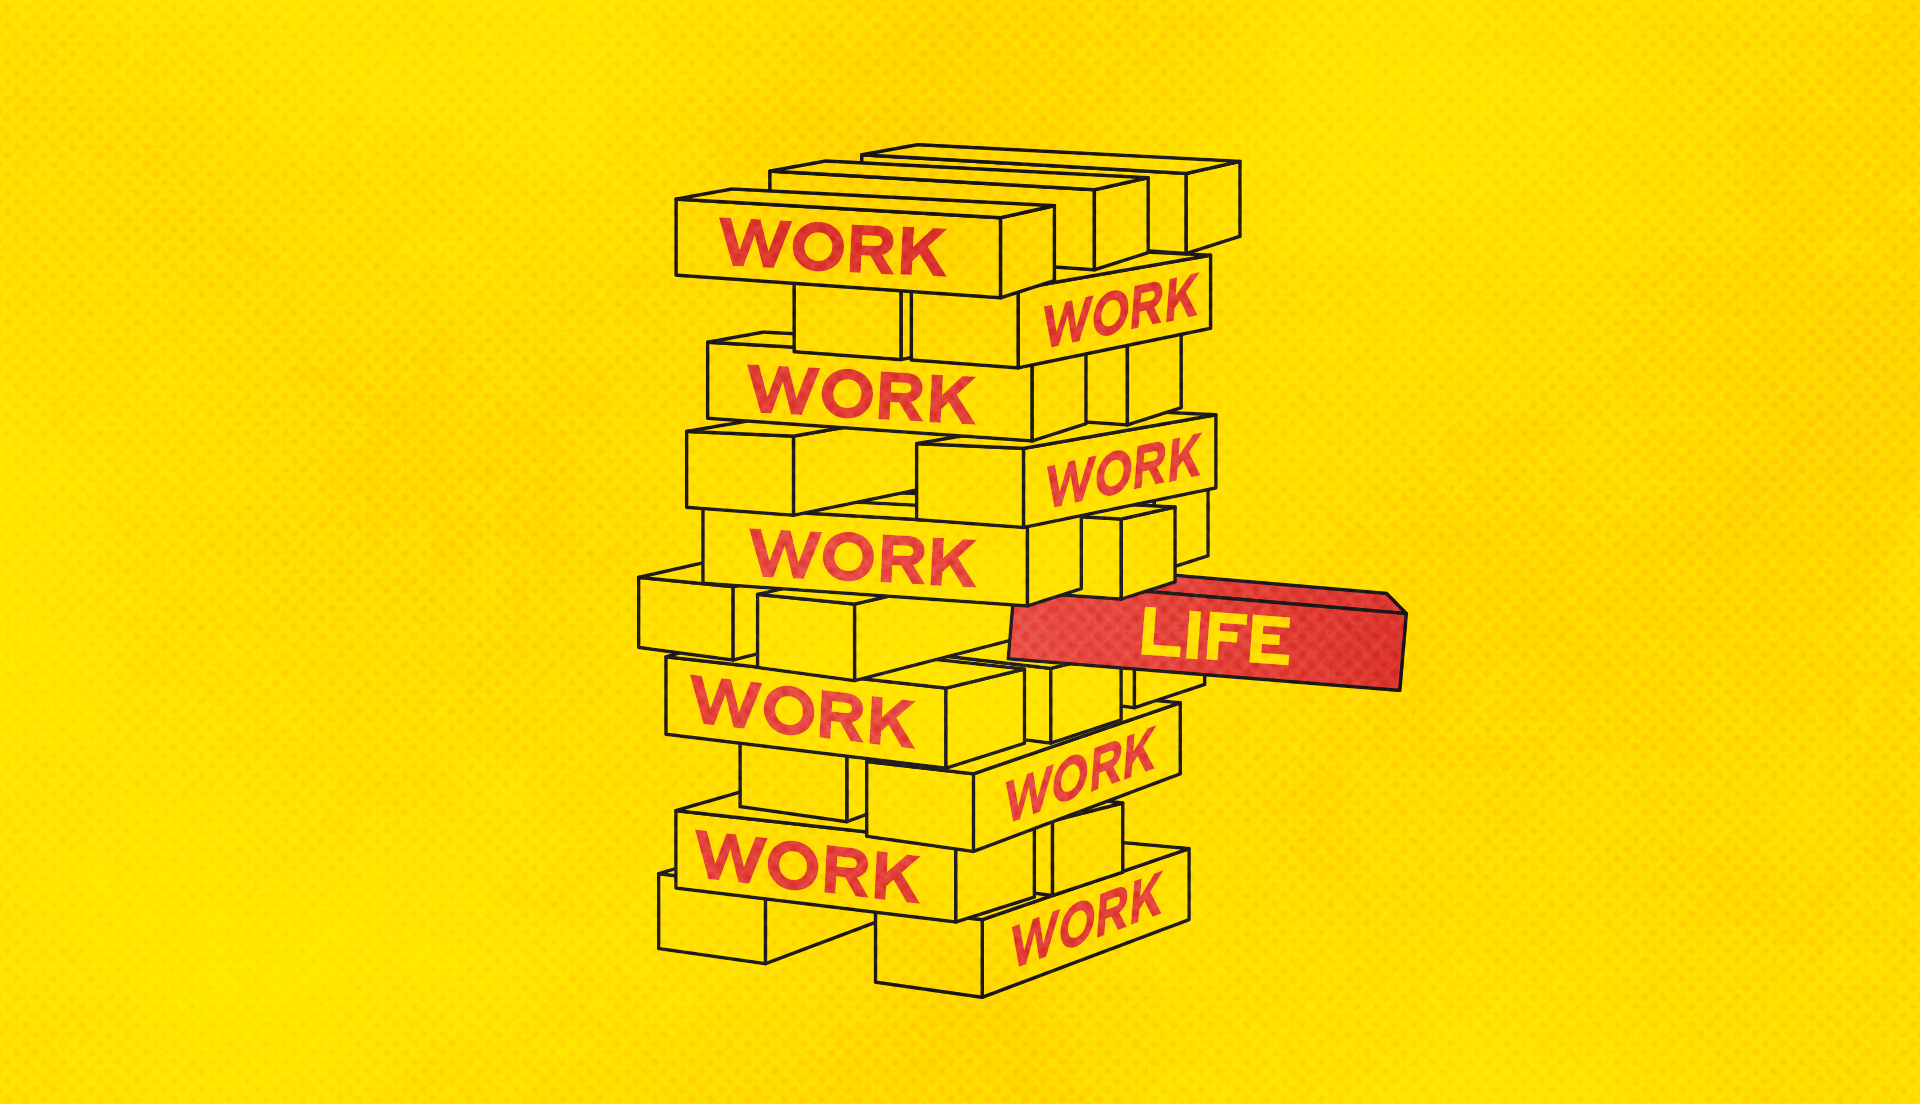 An illustration of a tower of blocks with work written on all of them, with a single block labeled life balanced on top. - Balance